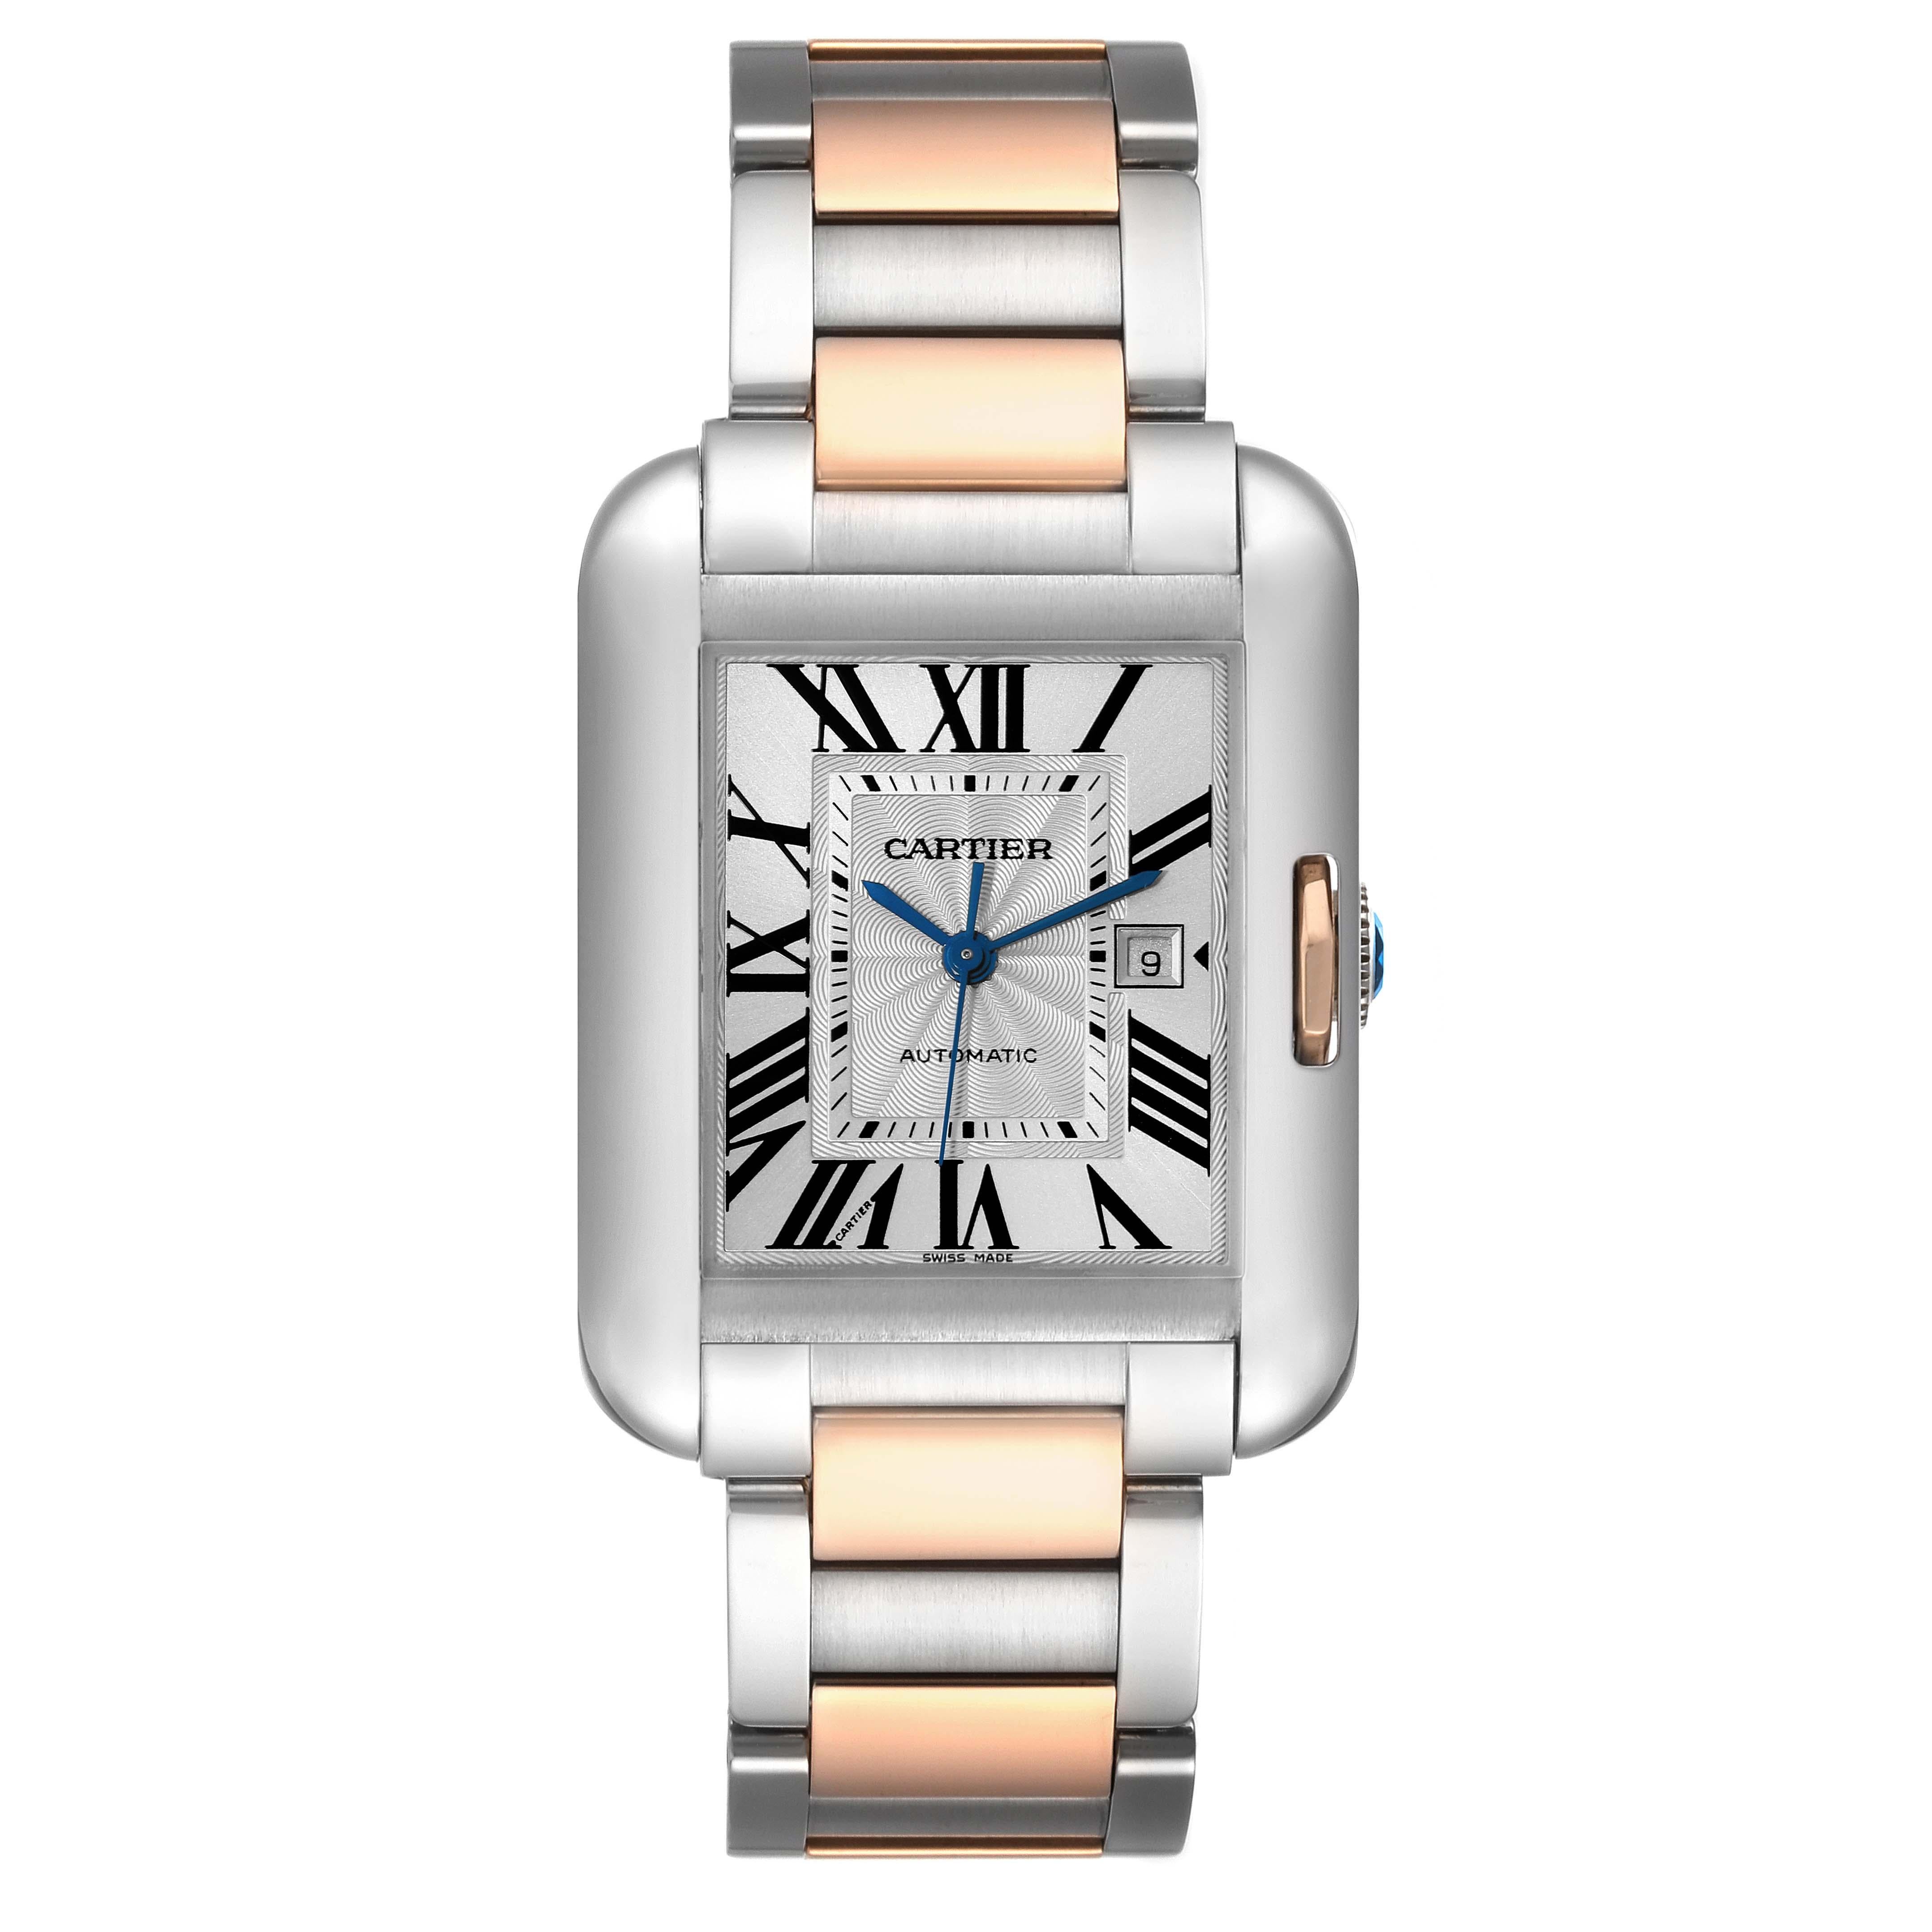 Cartier Tank Anglaise Large Steel Rose Gold Mens Watch W5310037 Papers. Automatic self-winding movement. Stainless steel and 18K rose gold rectangle case 39.2 mm x 29.8 mm. Case thickness: 9.5 mm. Crown set with a faceted blue spinel. . Scratch